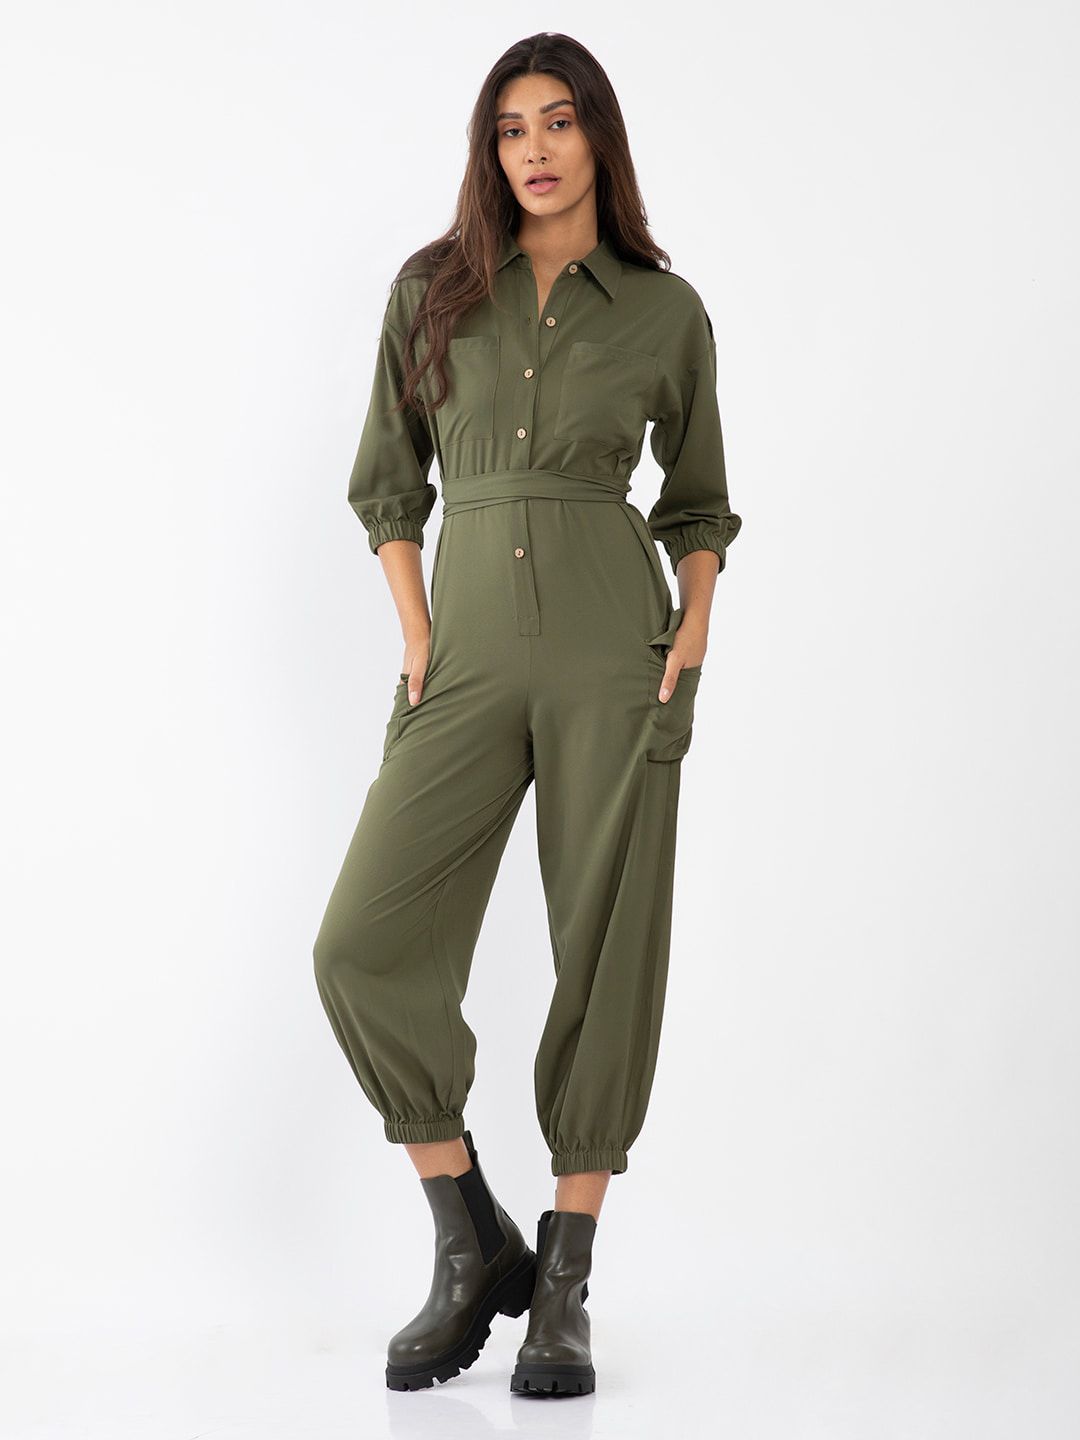 Zink London Olive Green Basic Jumpsuit Price in India